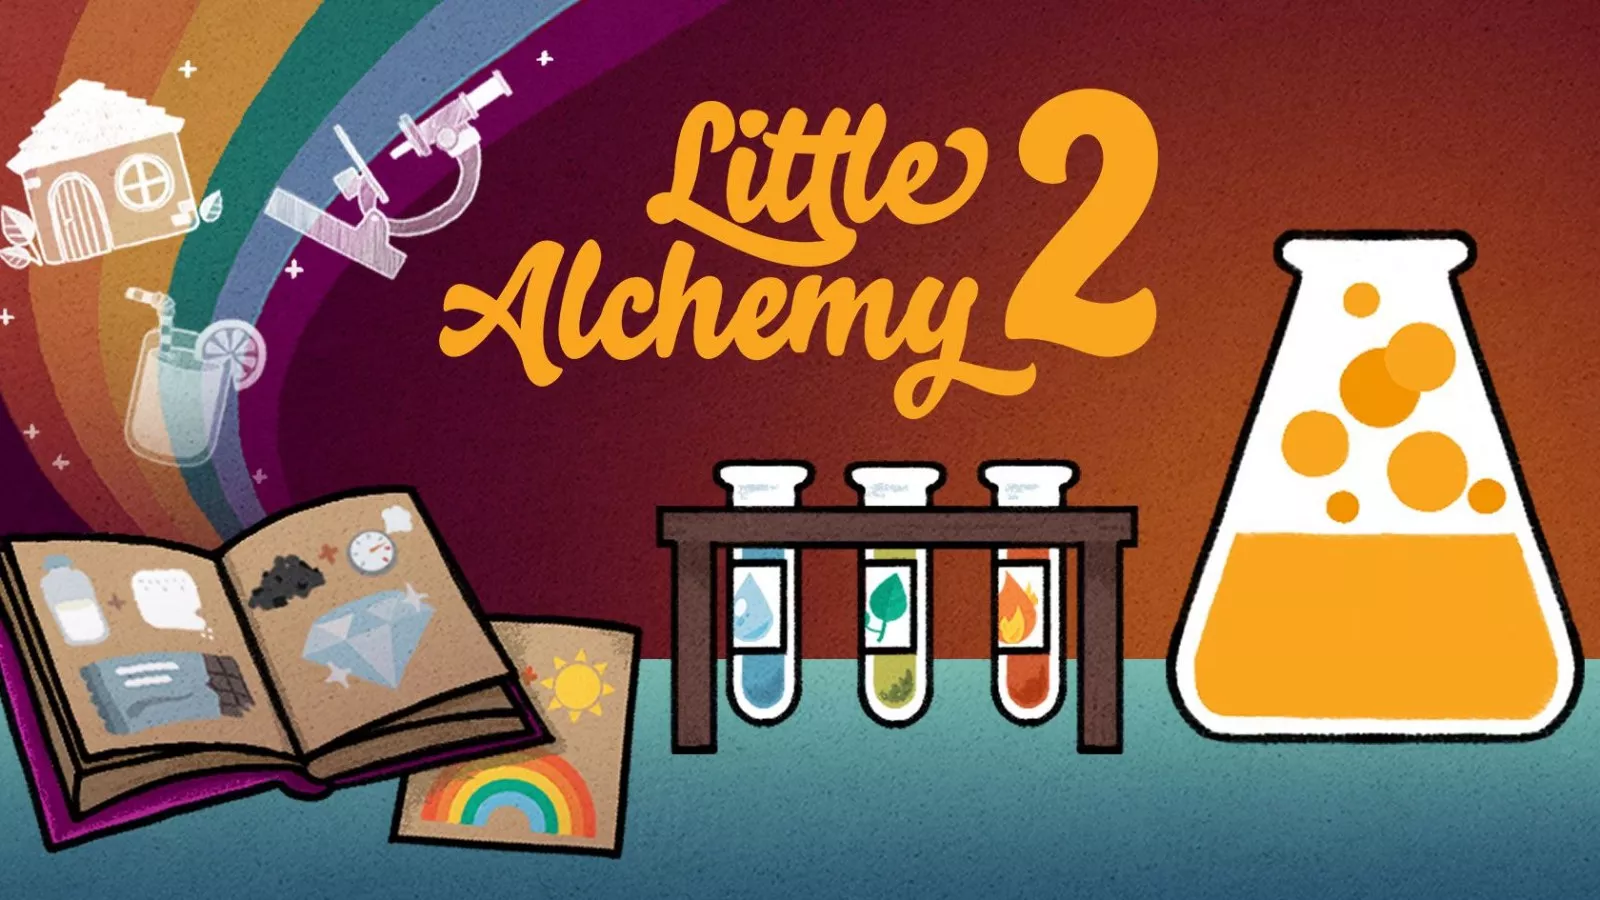 Little Alchemy 2' Update Cheats & Hints: How to Make New Item in the Myths  and Monsters Expansion